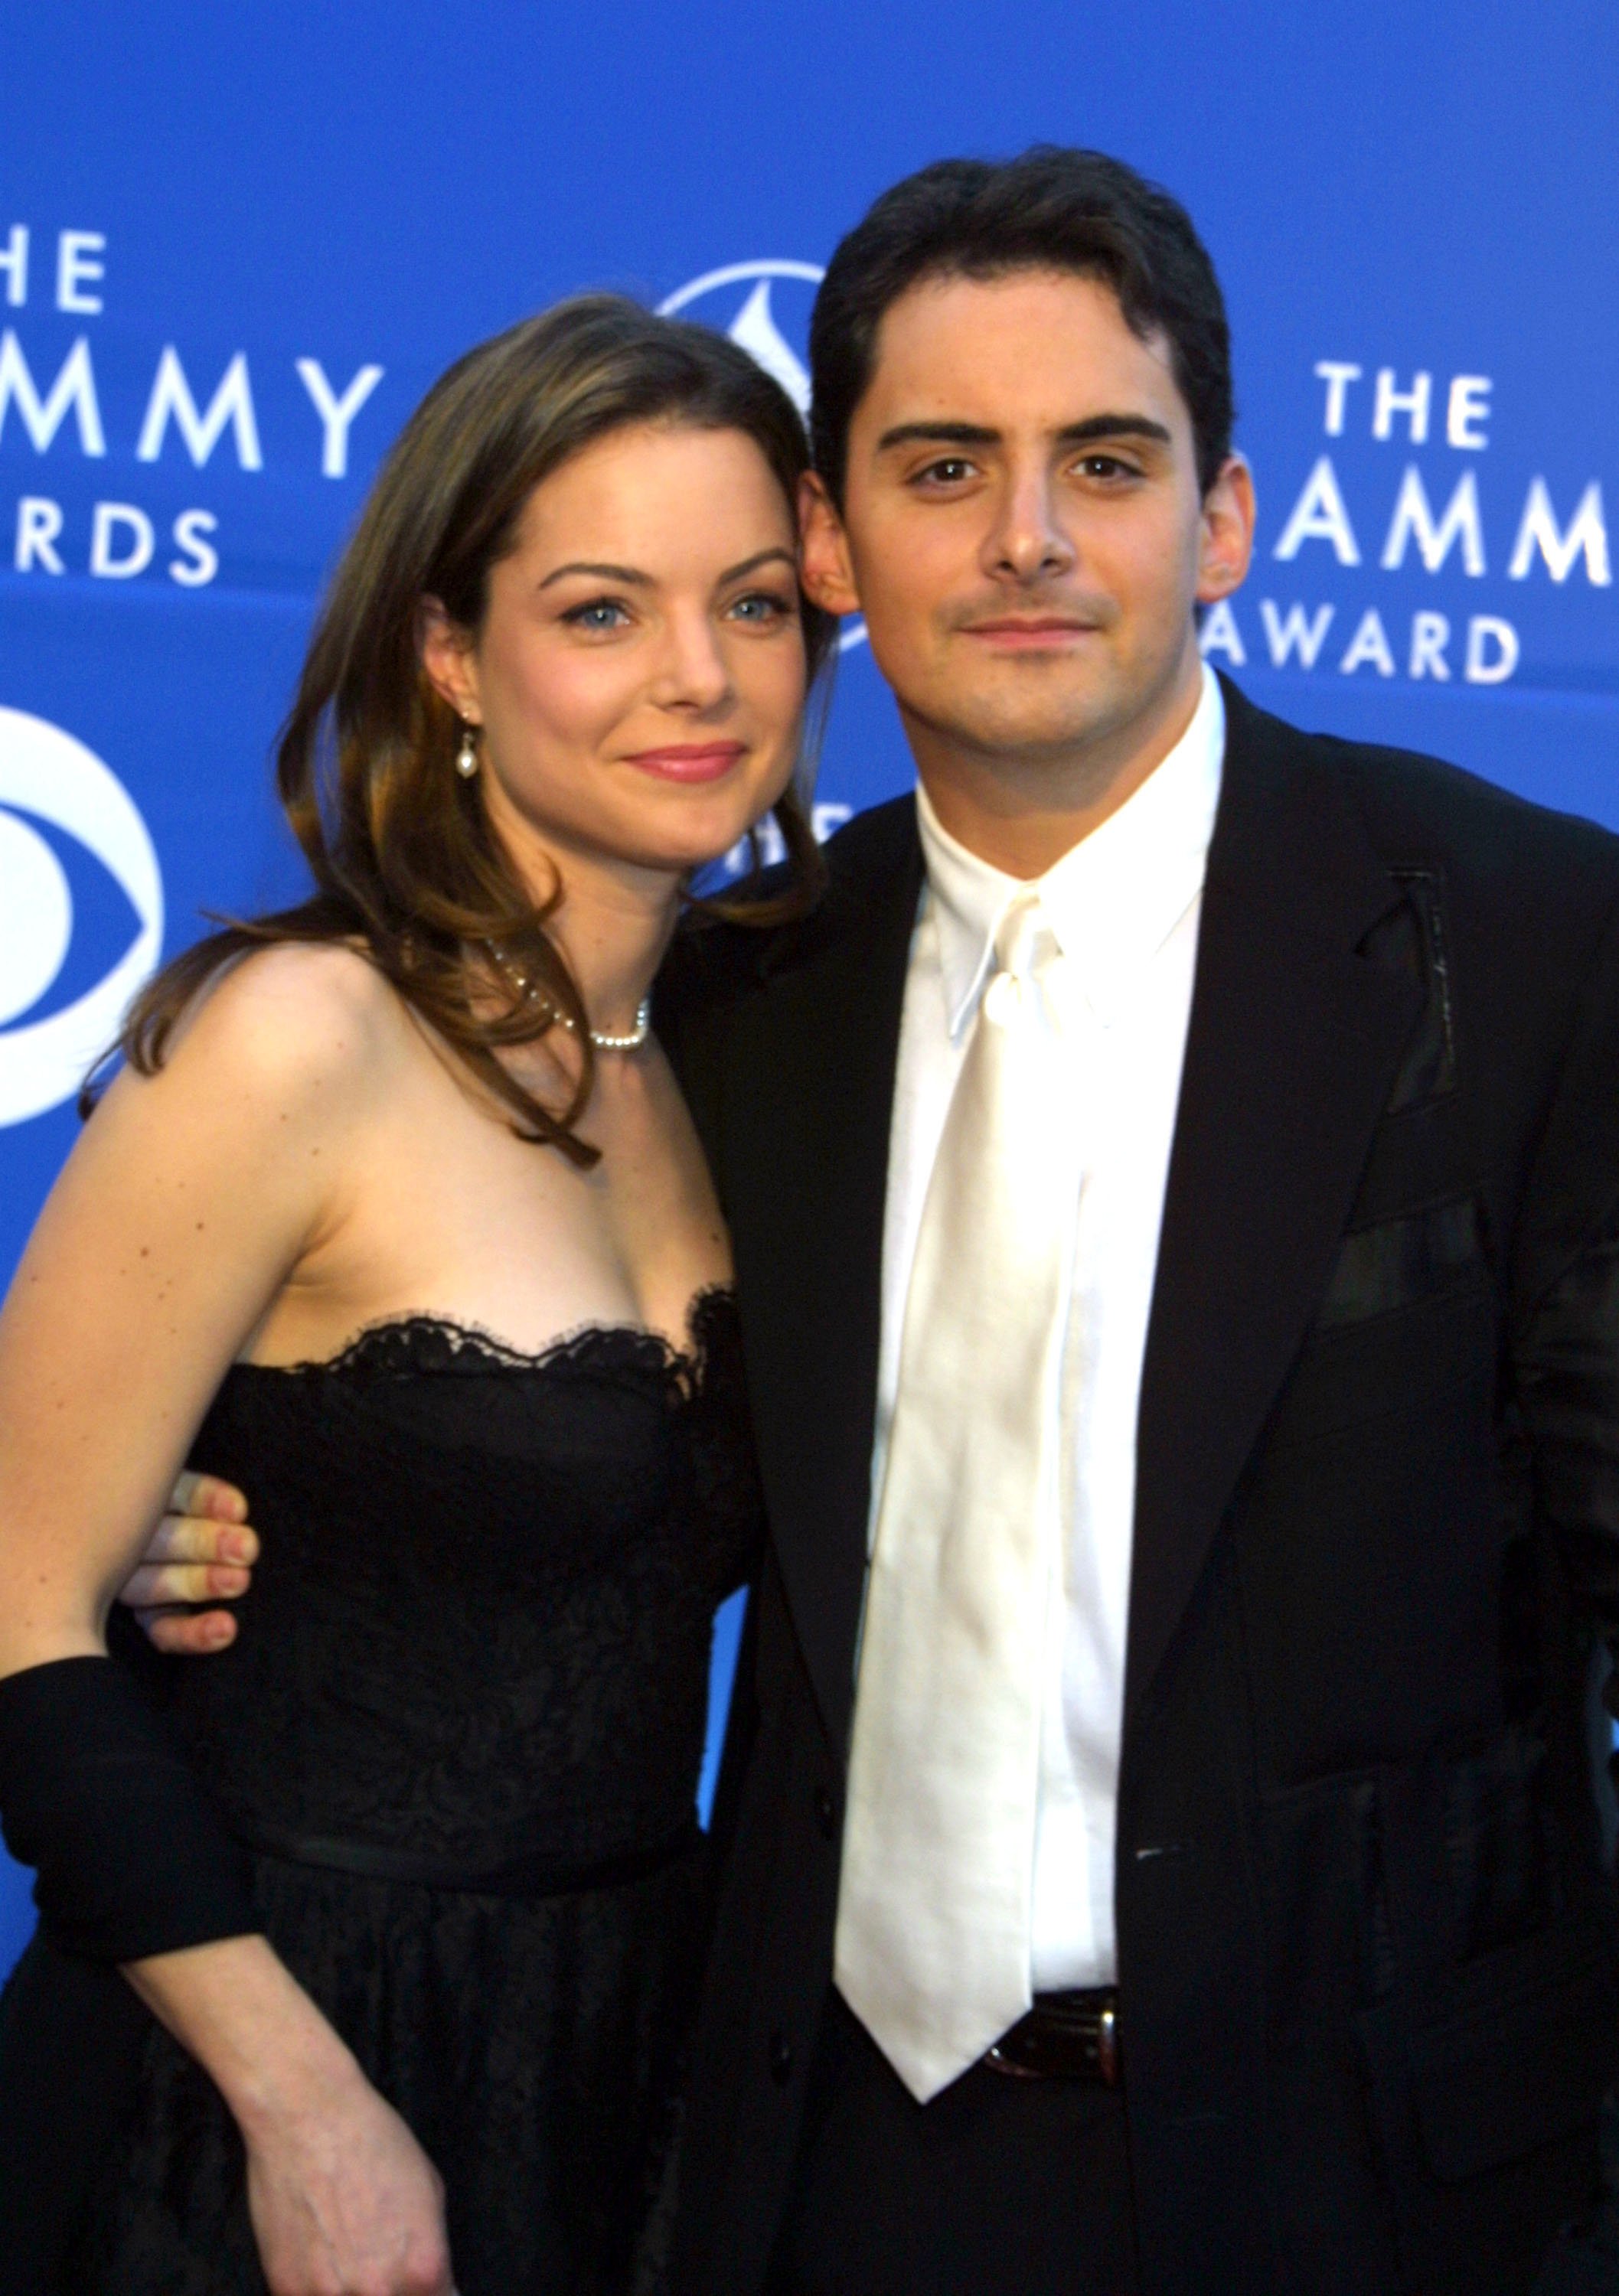 Kimberly and Brad Paisley at the 44th Grammy awards in 2002. | Source: Getty Images